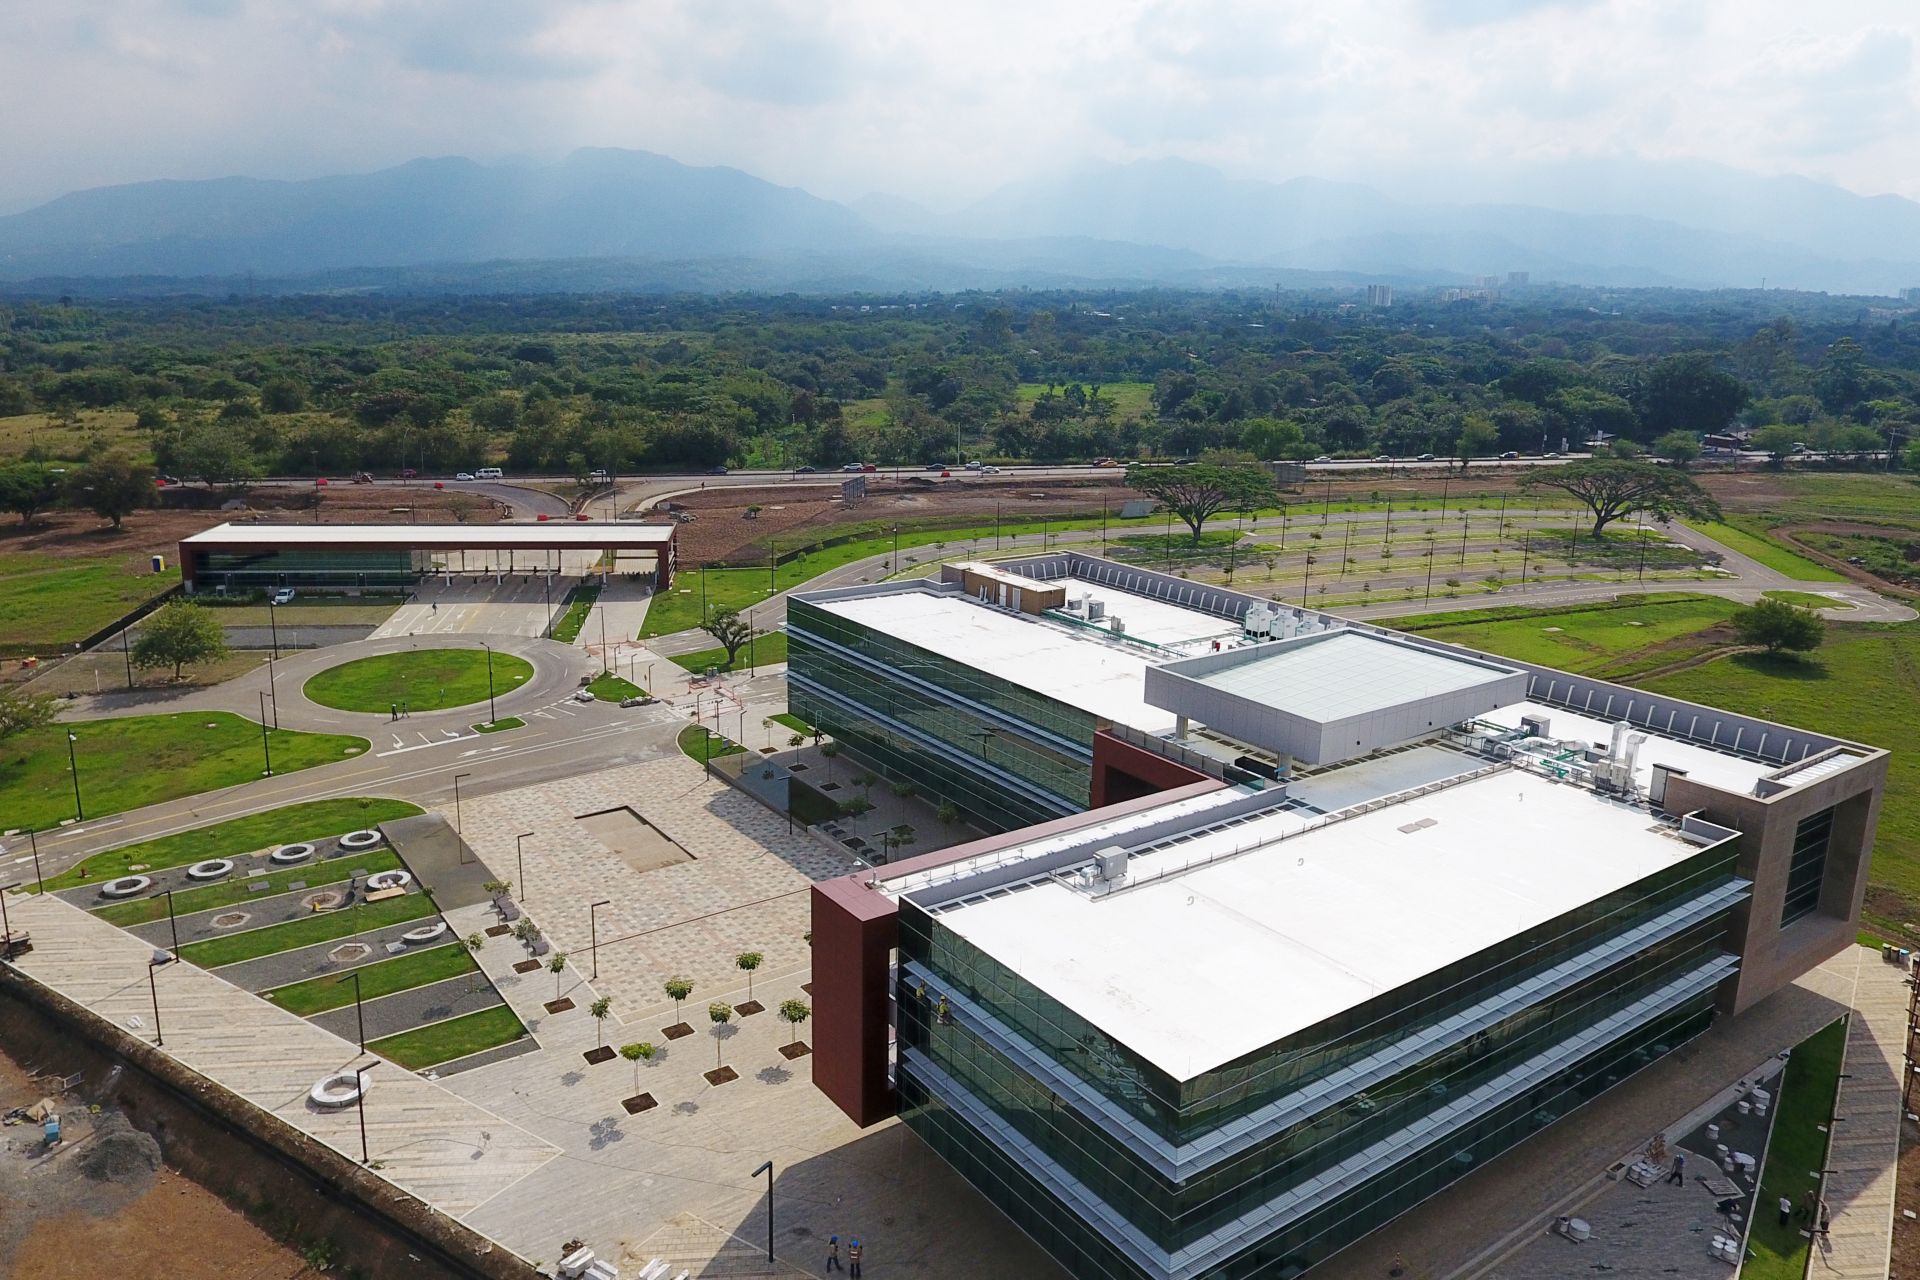 Sika cool roof applied on on office building in Colombia